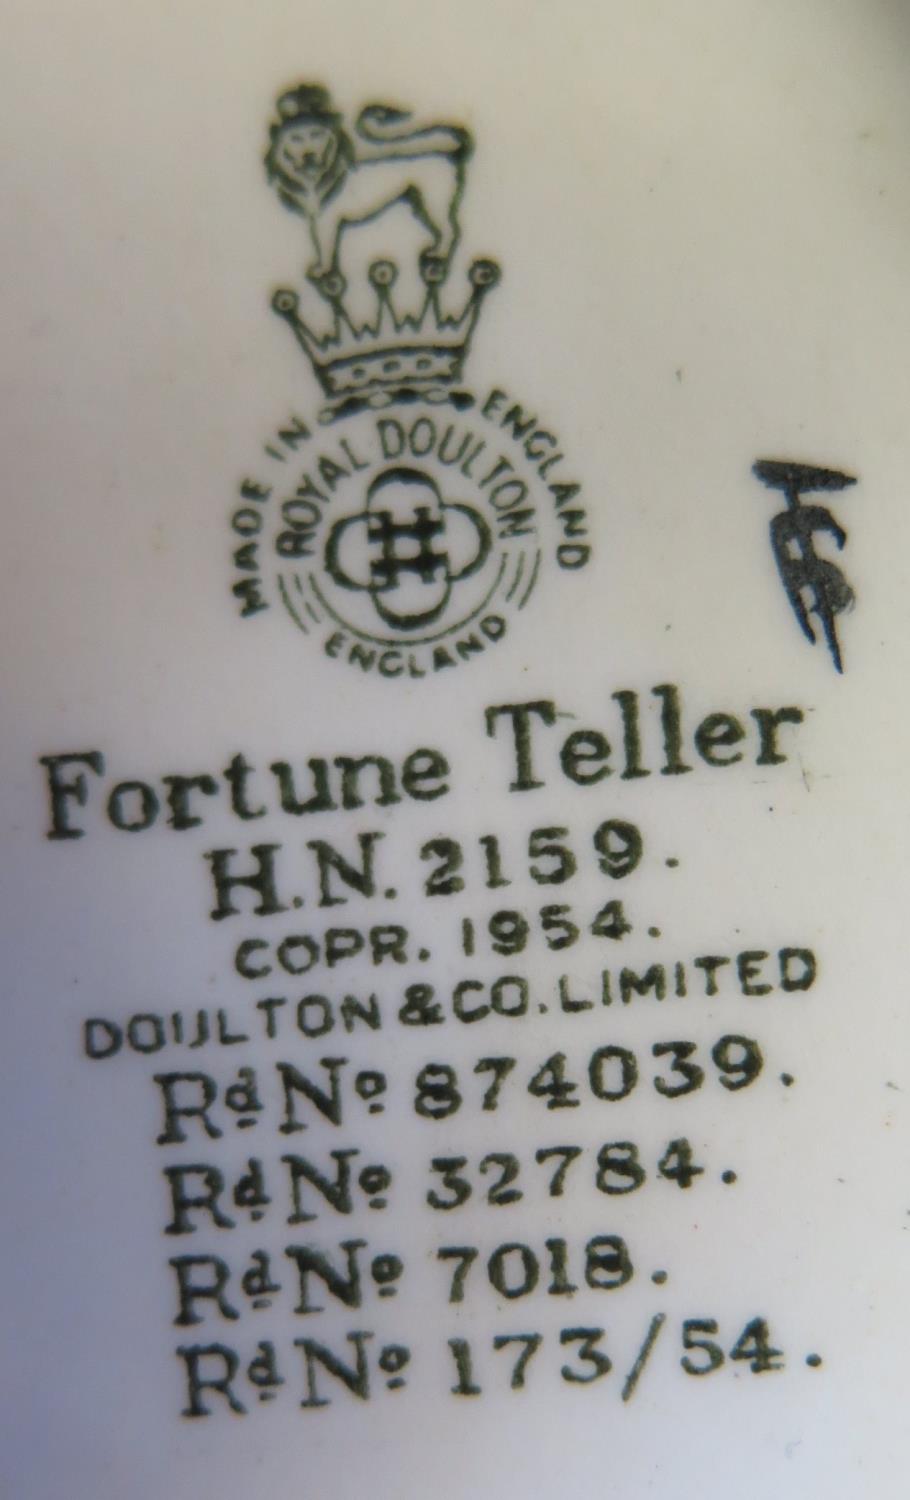 A Royal Doulton Figurine Fortune Teller HN2159 - Image 3 of 3